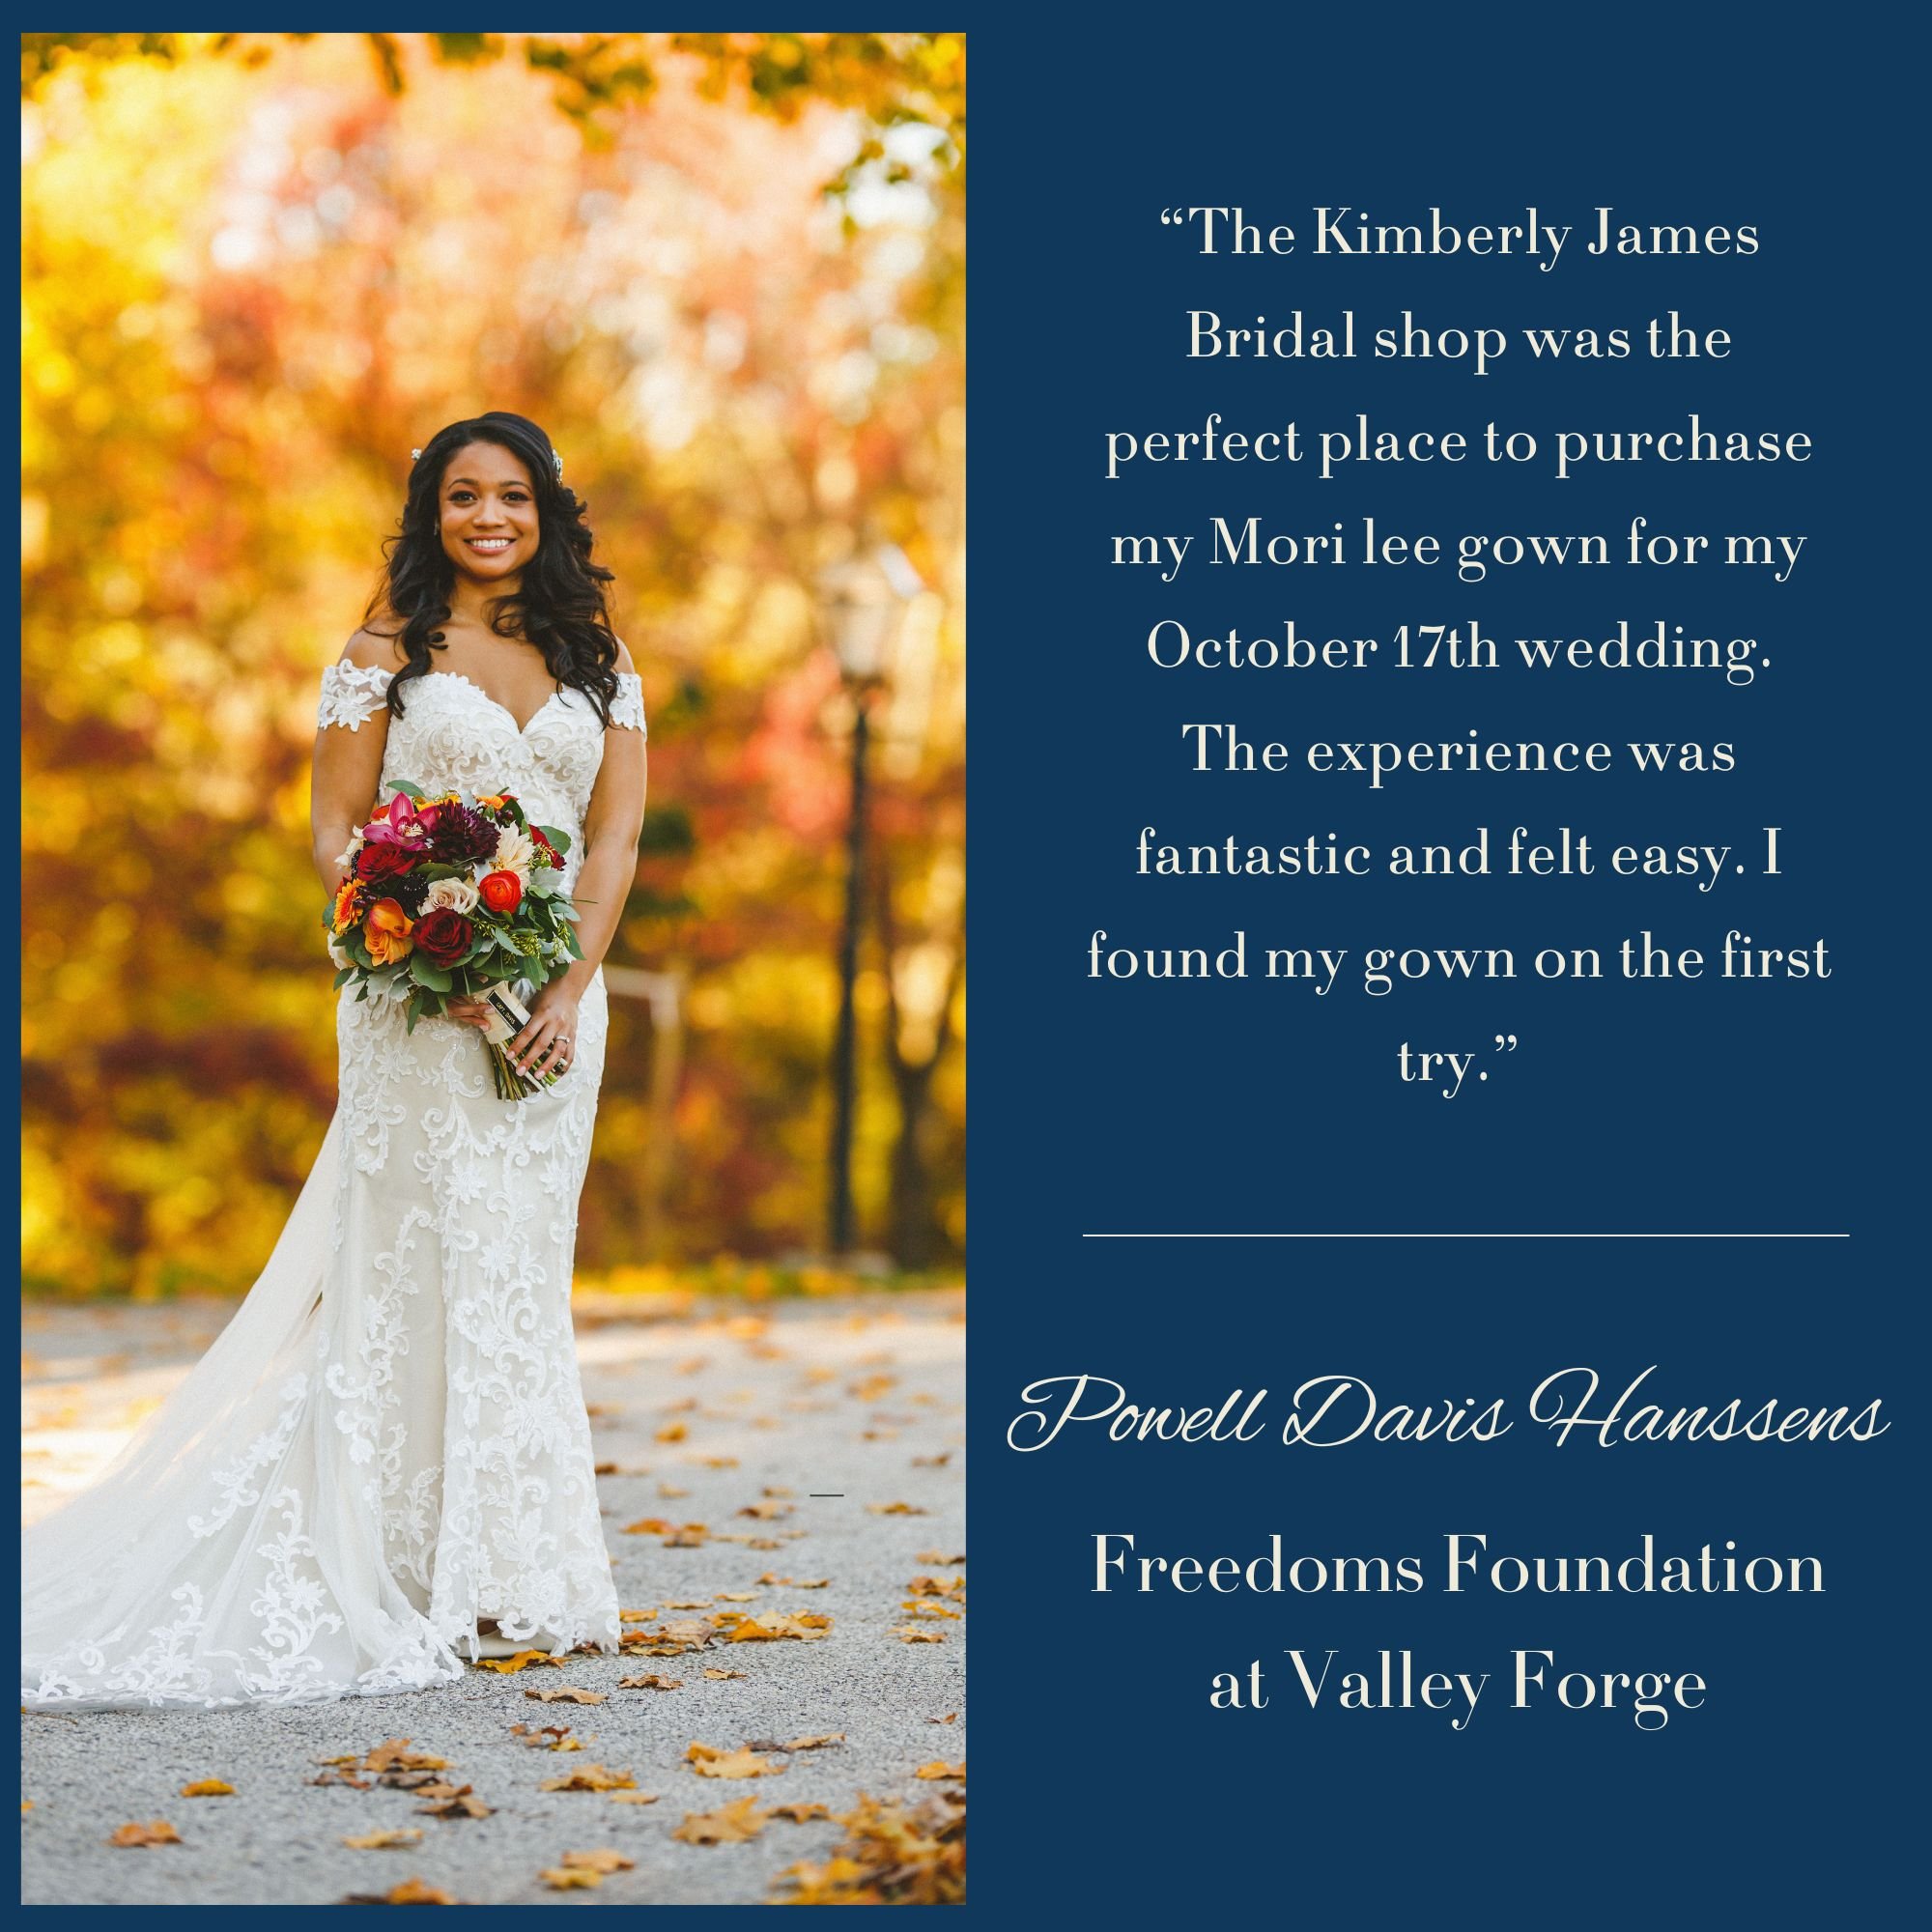 Freedoms Foundation at Valley Forge